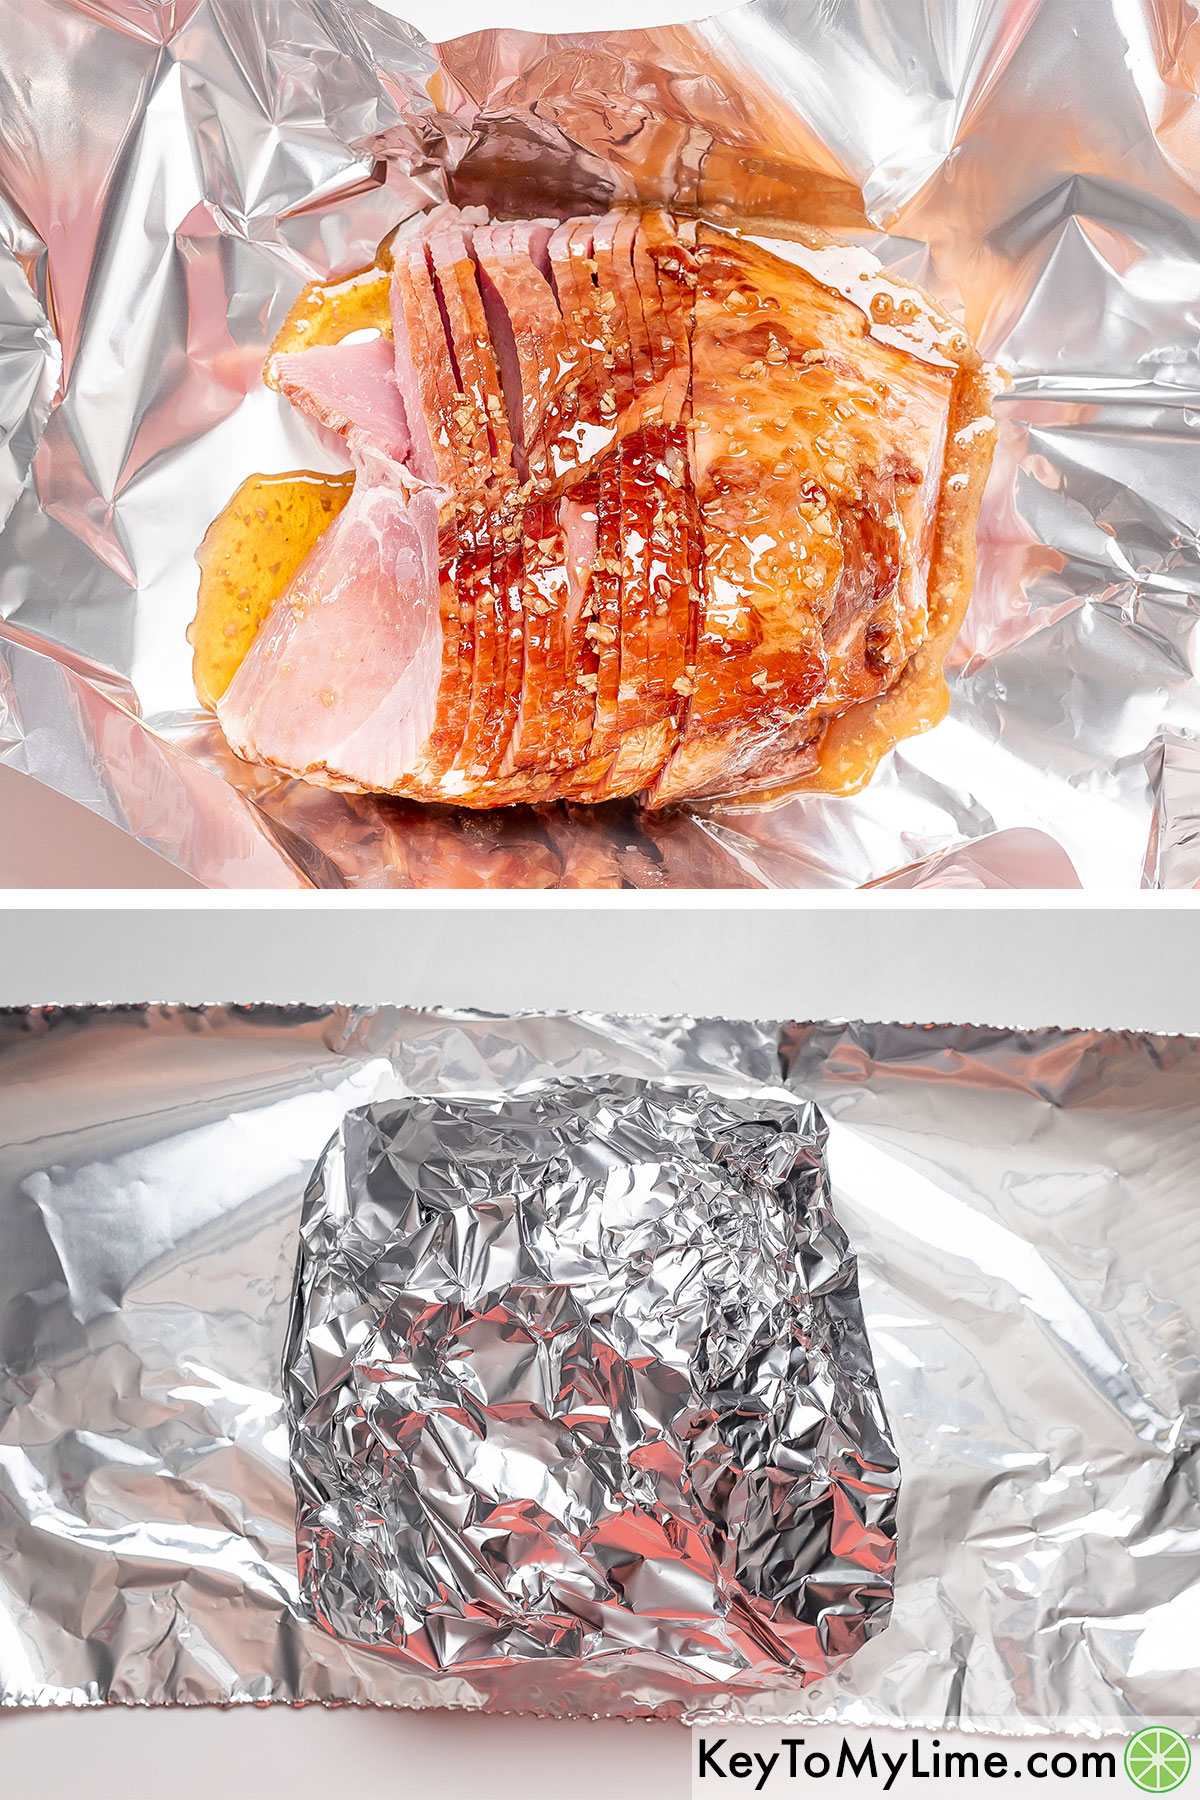 Placing the spiral ham in aluminum foil and drizzling the glaze over before covering up.